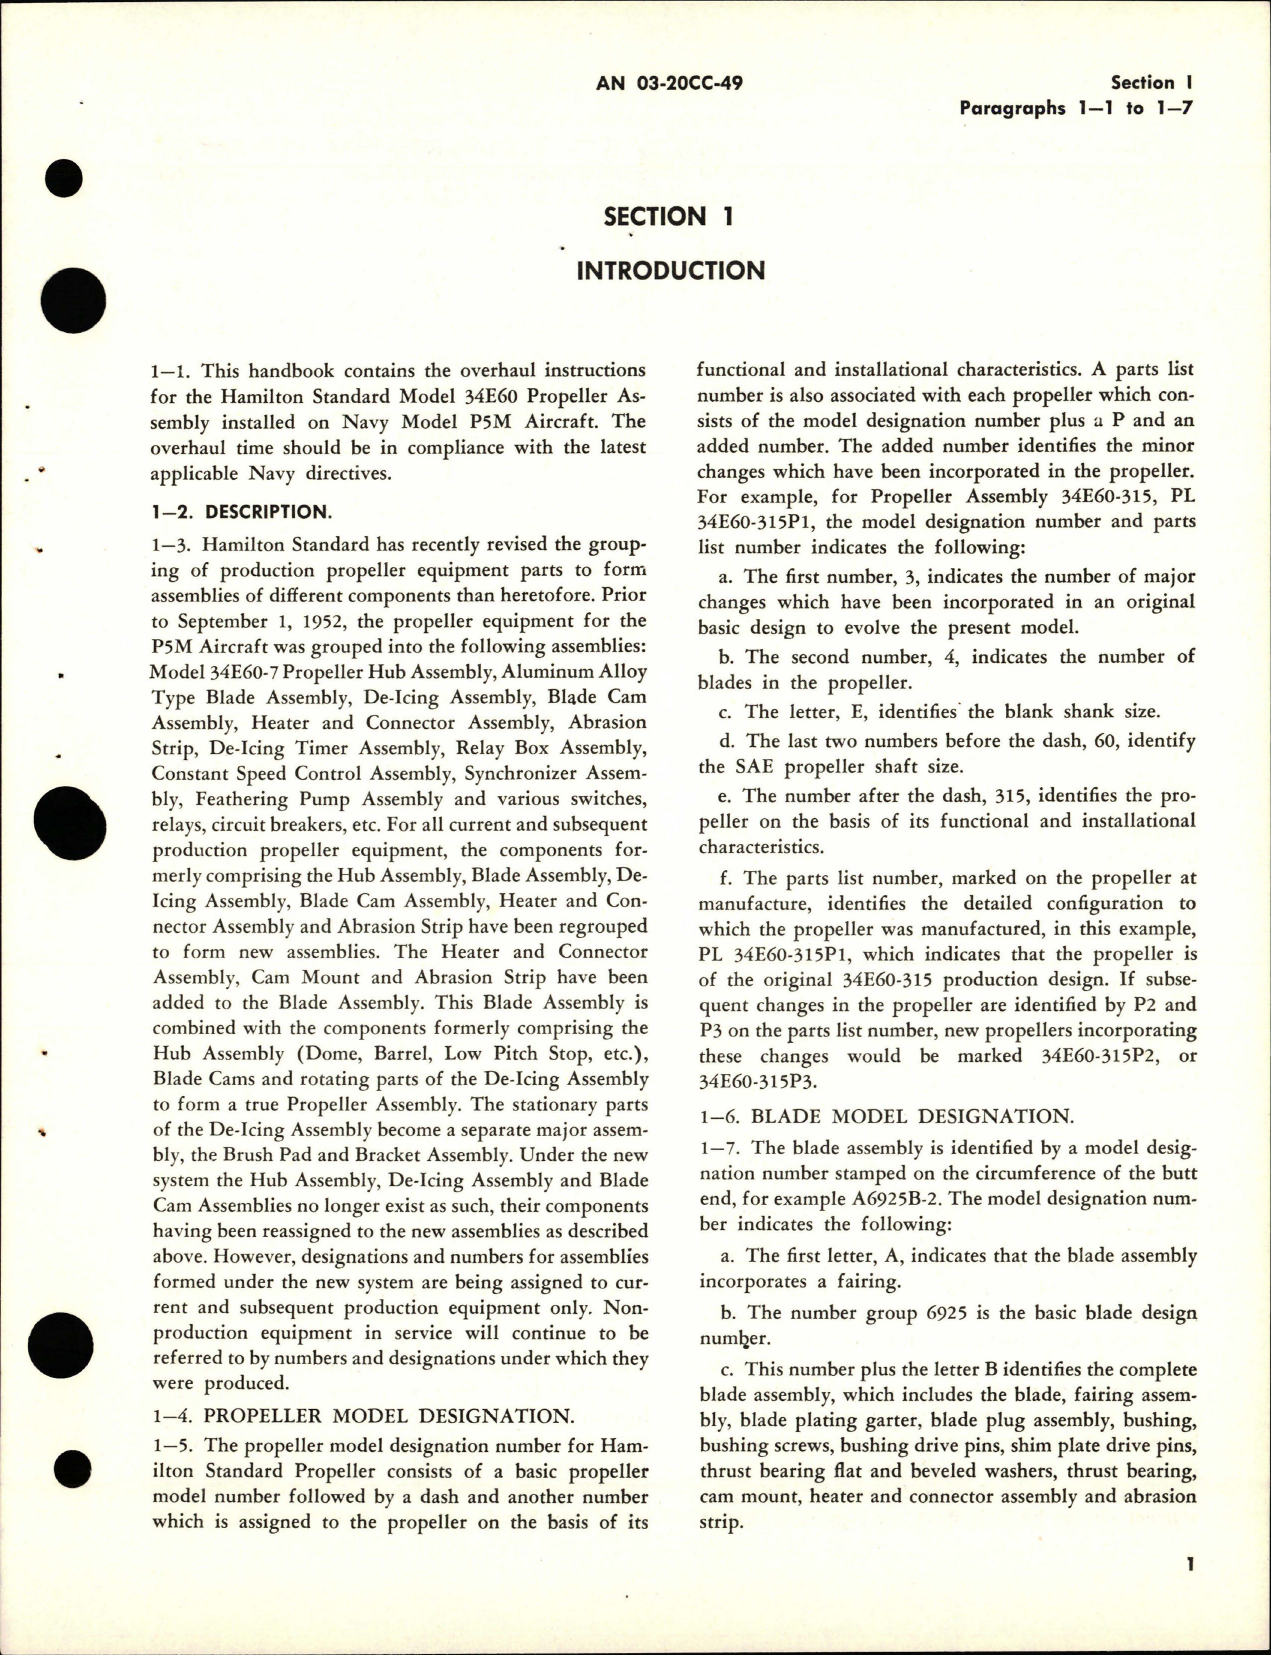 Sample page 5 from AirCorps Library document: Overhaul Instructions for Propeller Assembly - Model 34E60